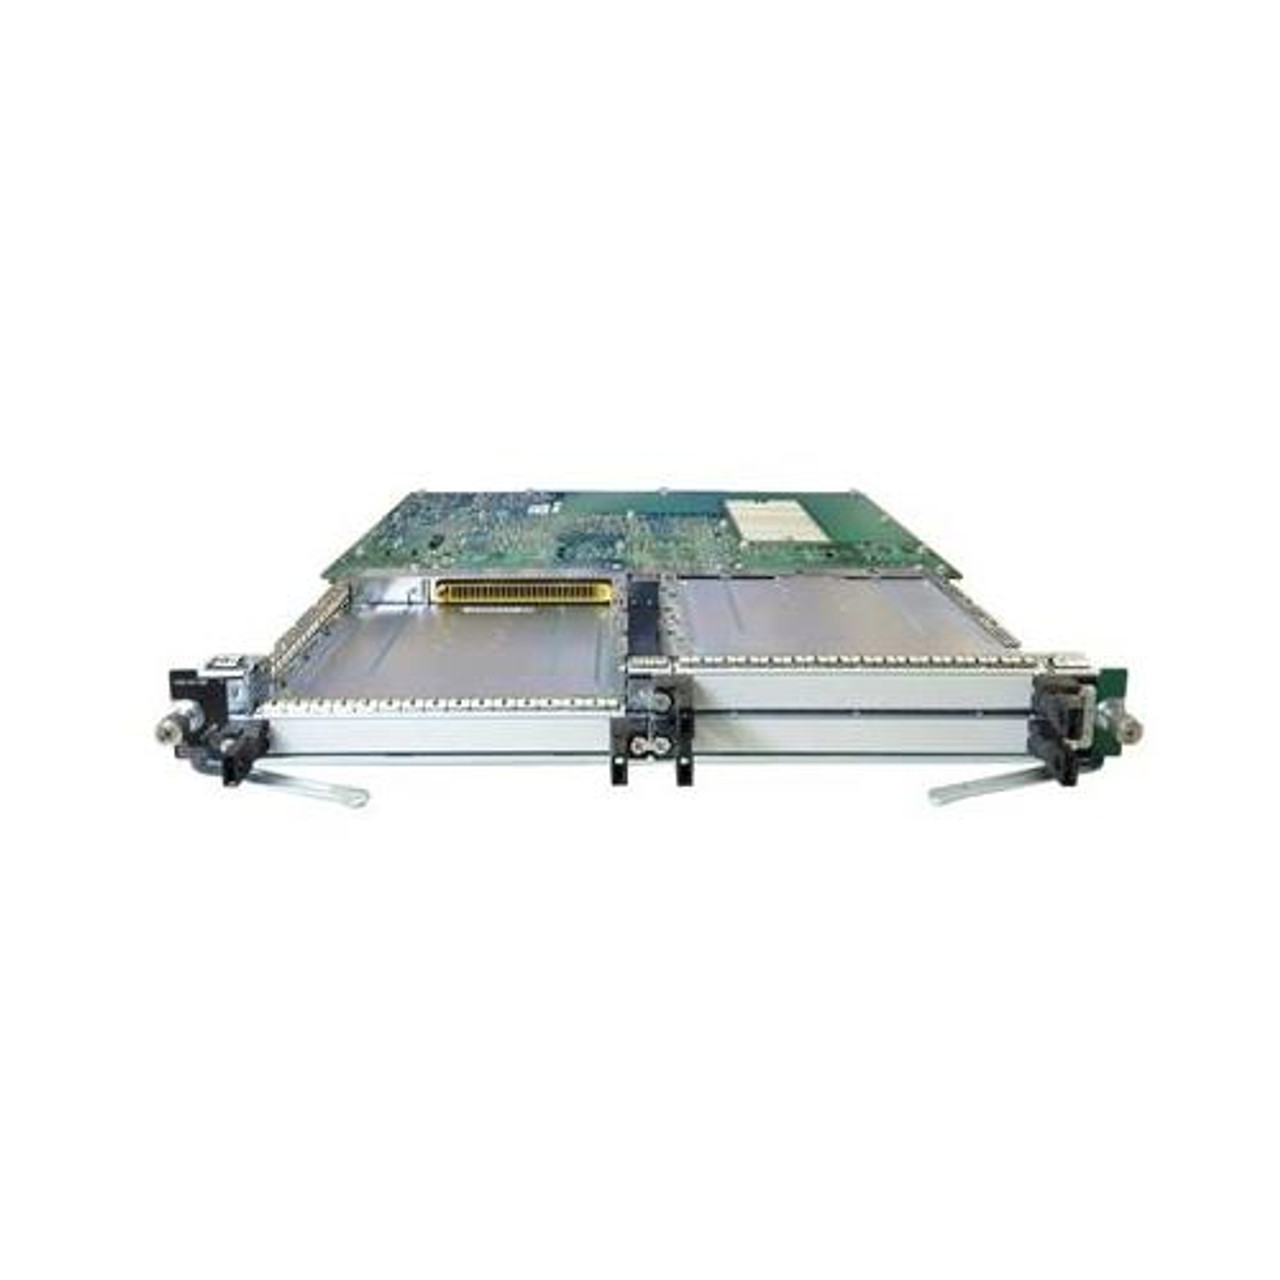 100-004547-001 Cisco AIRONET 340 11Mbps PCI with antenna (PC1C-B10-1C) (Refurbished)